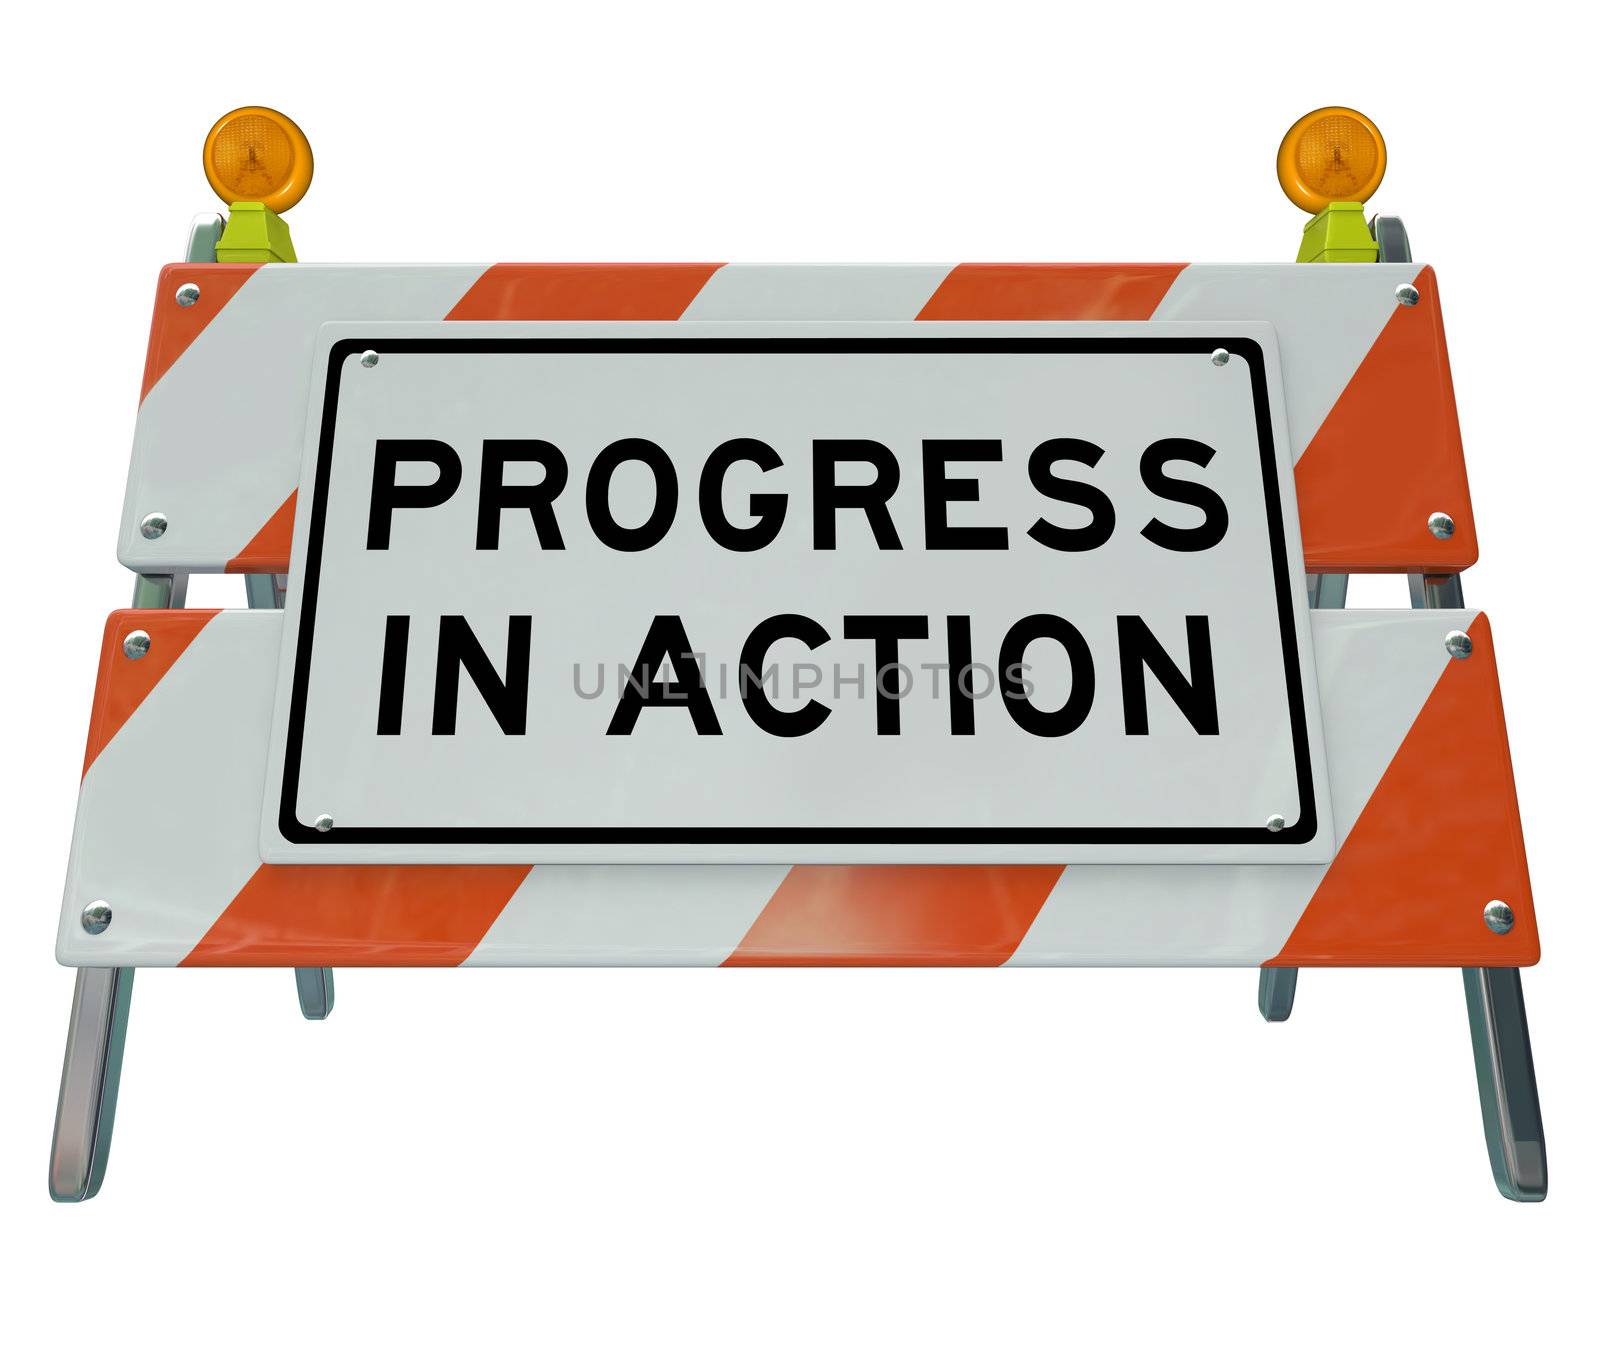 A road barrier reading Progress in Action signifies that work is being done on a project to lead to change and improvement, and that the inconvenience is temporary while we wait for better conditions